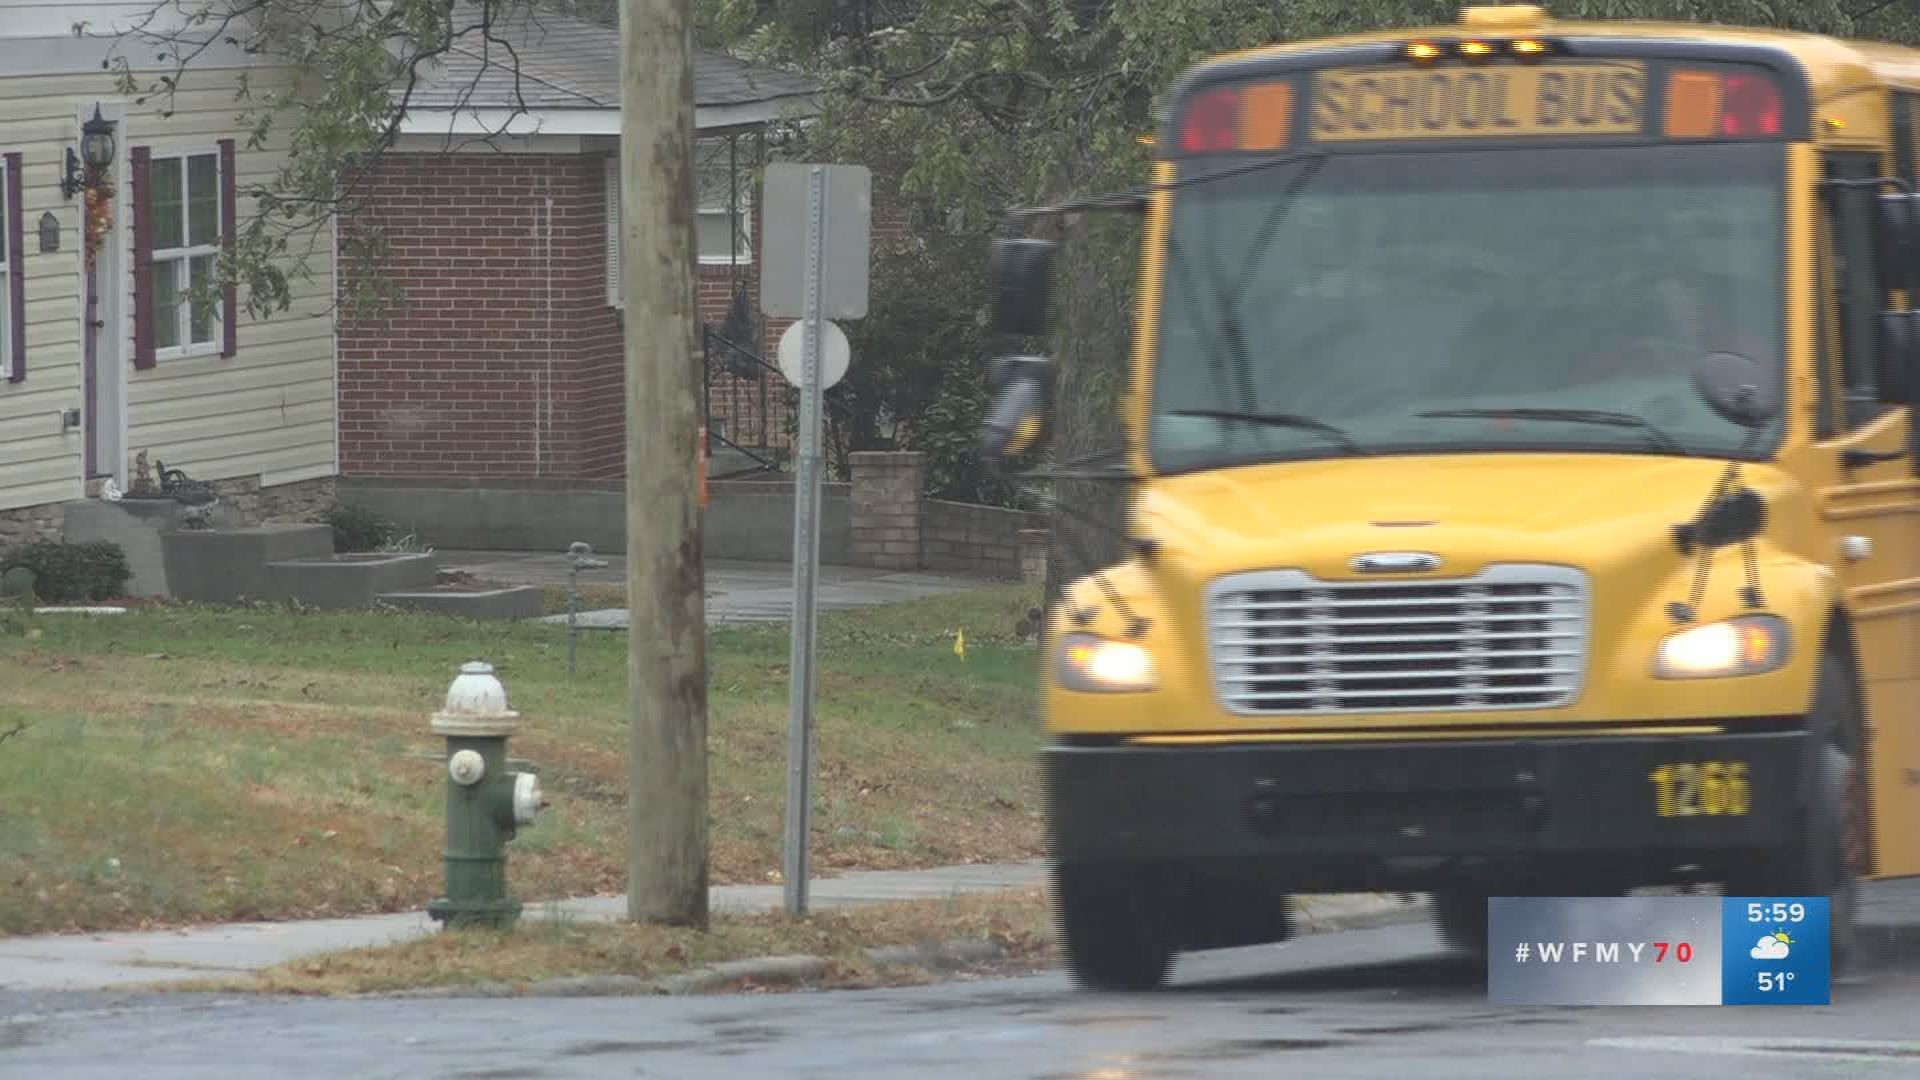 About 150 Guilford County Schools’ bus drivers are planning to walkout next week to rally for pay raises.